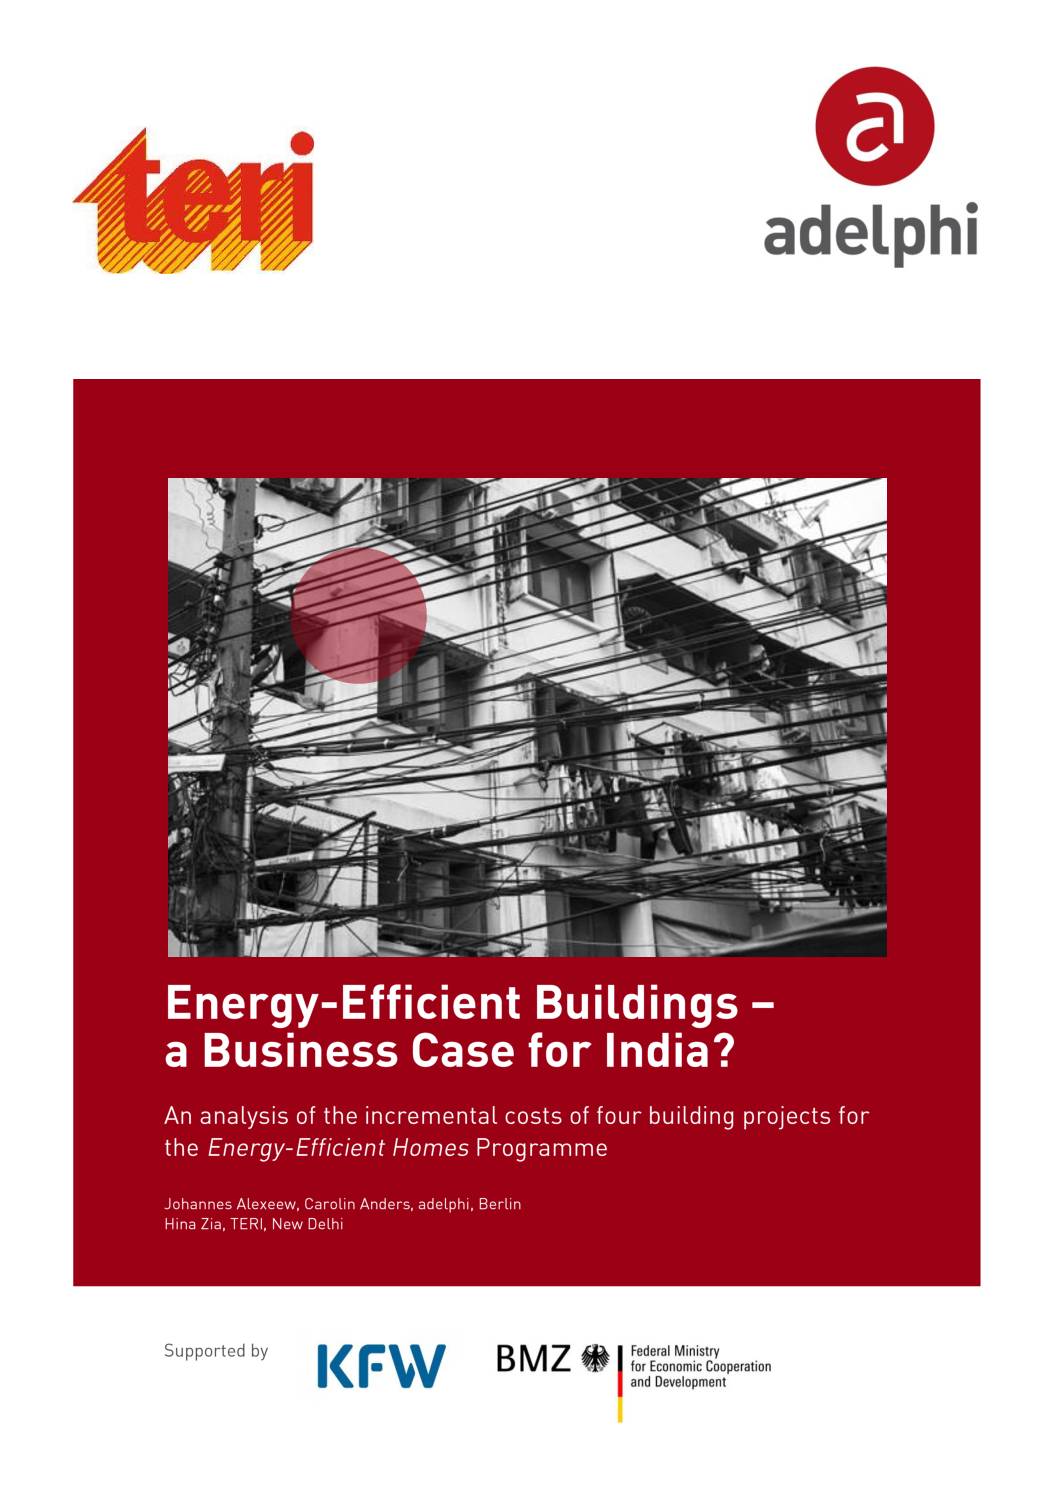 Energy-efficient buildings – a business case for India? – An analysis of incremental costs for four building projects of the Energy-Efficient Homes Programme